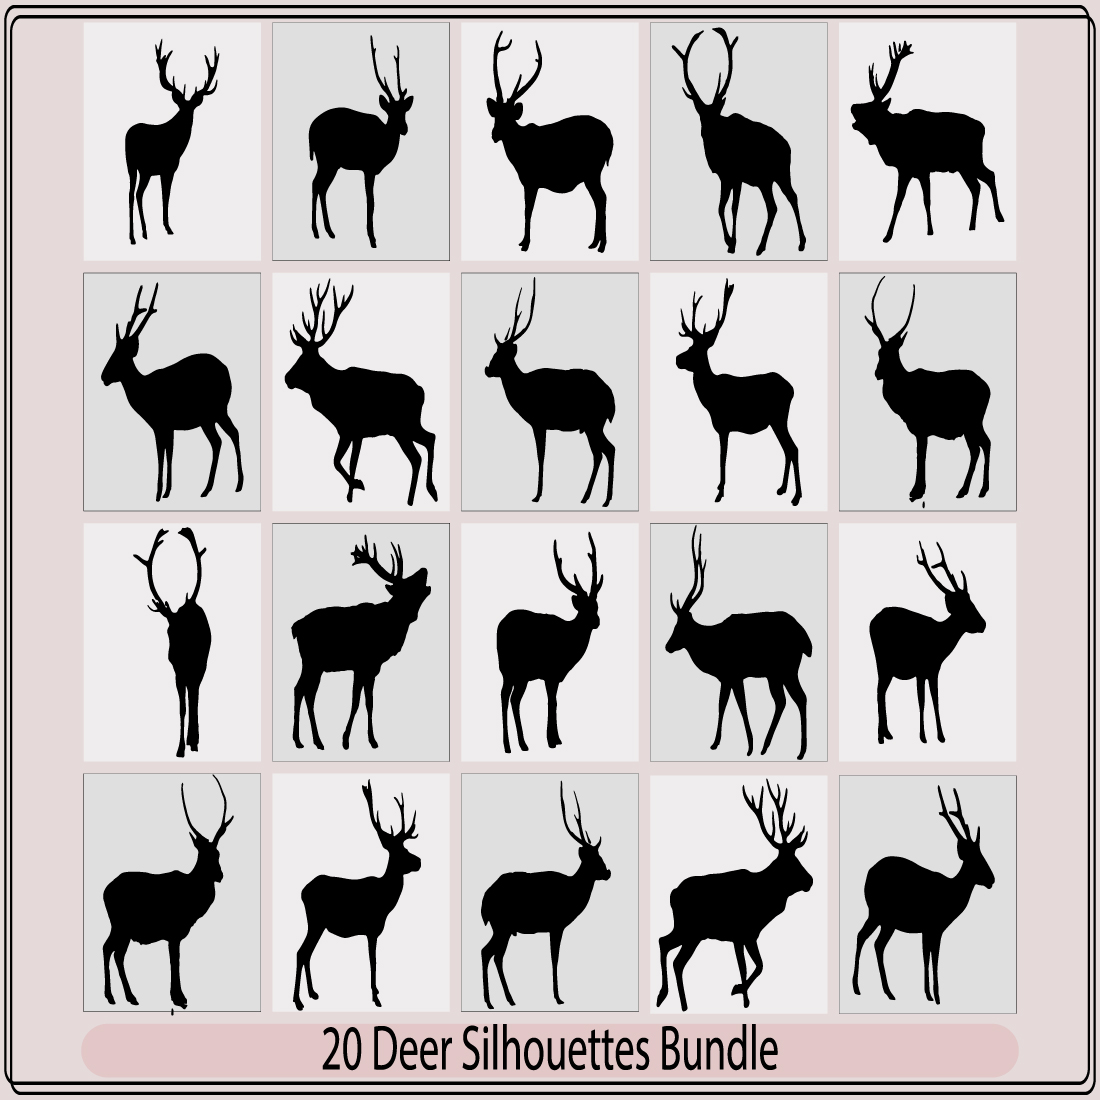 Deer vector silhouette iconssilhouettes of deers,silhouette of head of reindeer,Deer silhouette vector illustration preview image.